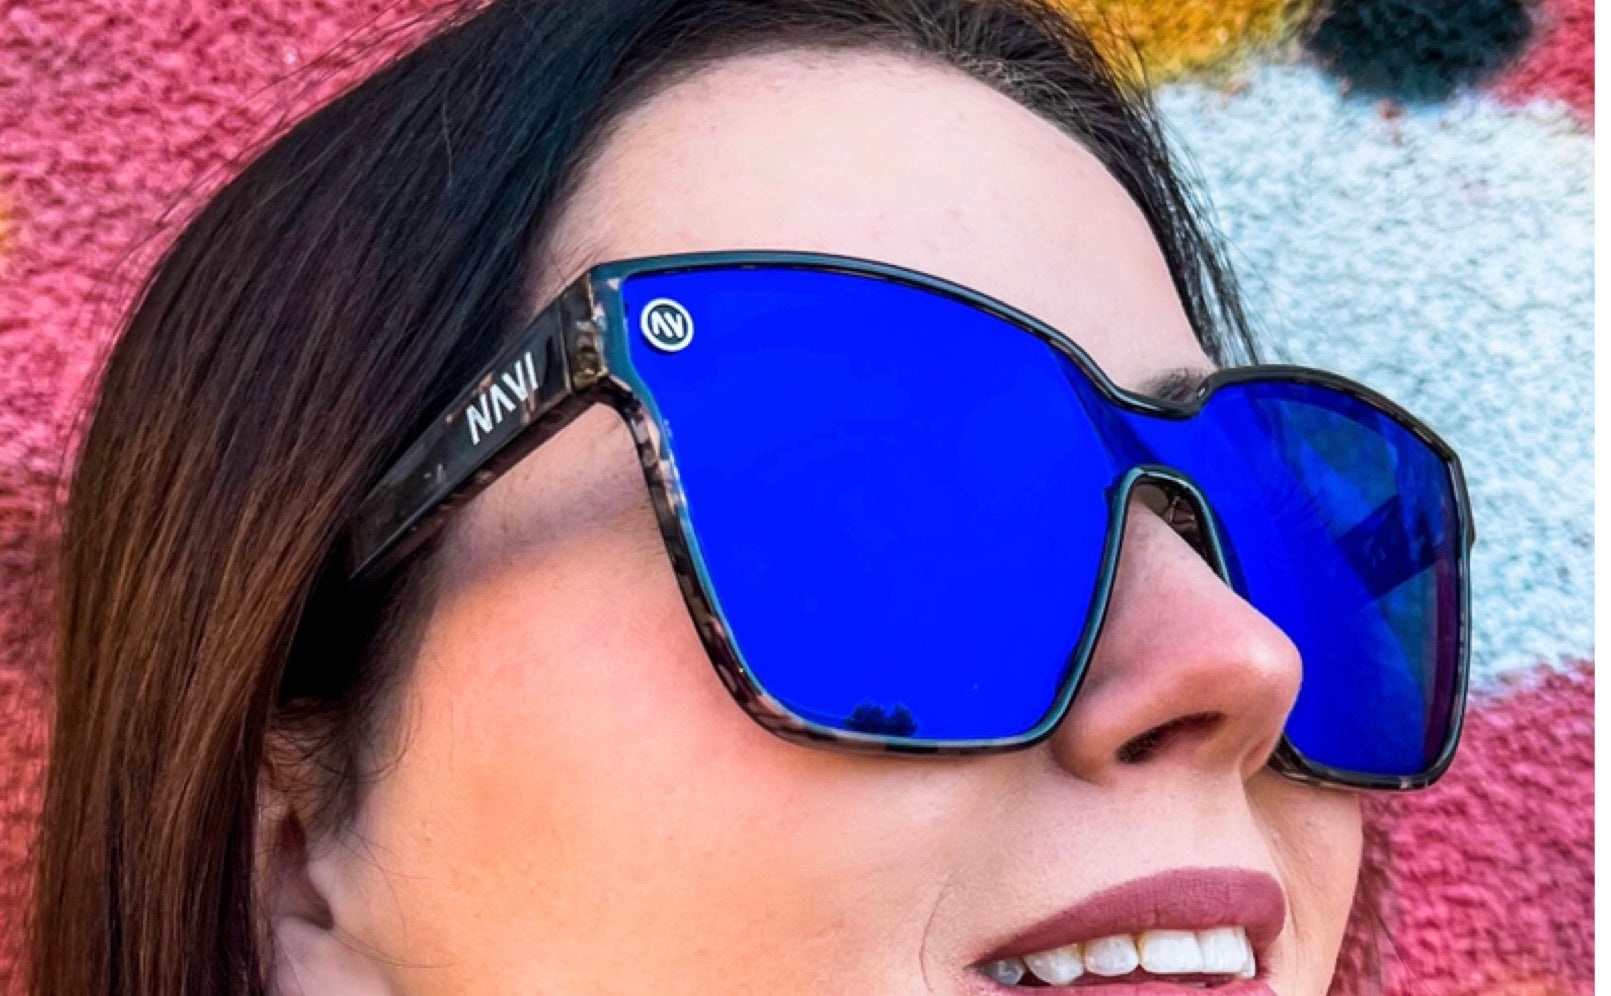 Sunglasses for Hiking: Protect Your Eyes and Enjoy the View